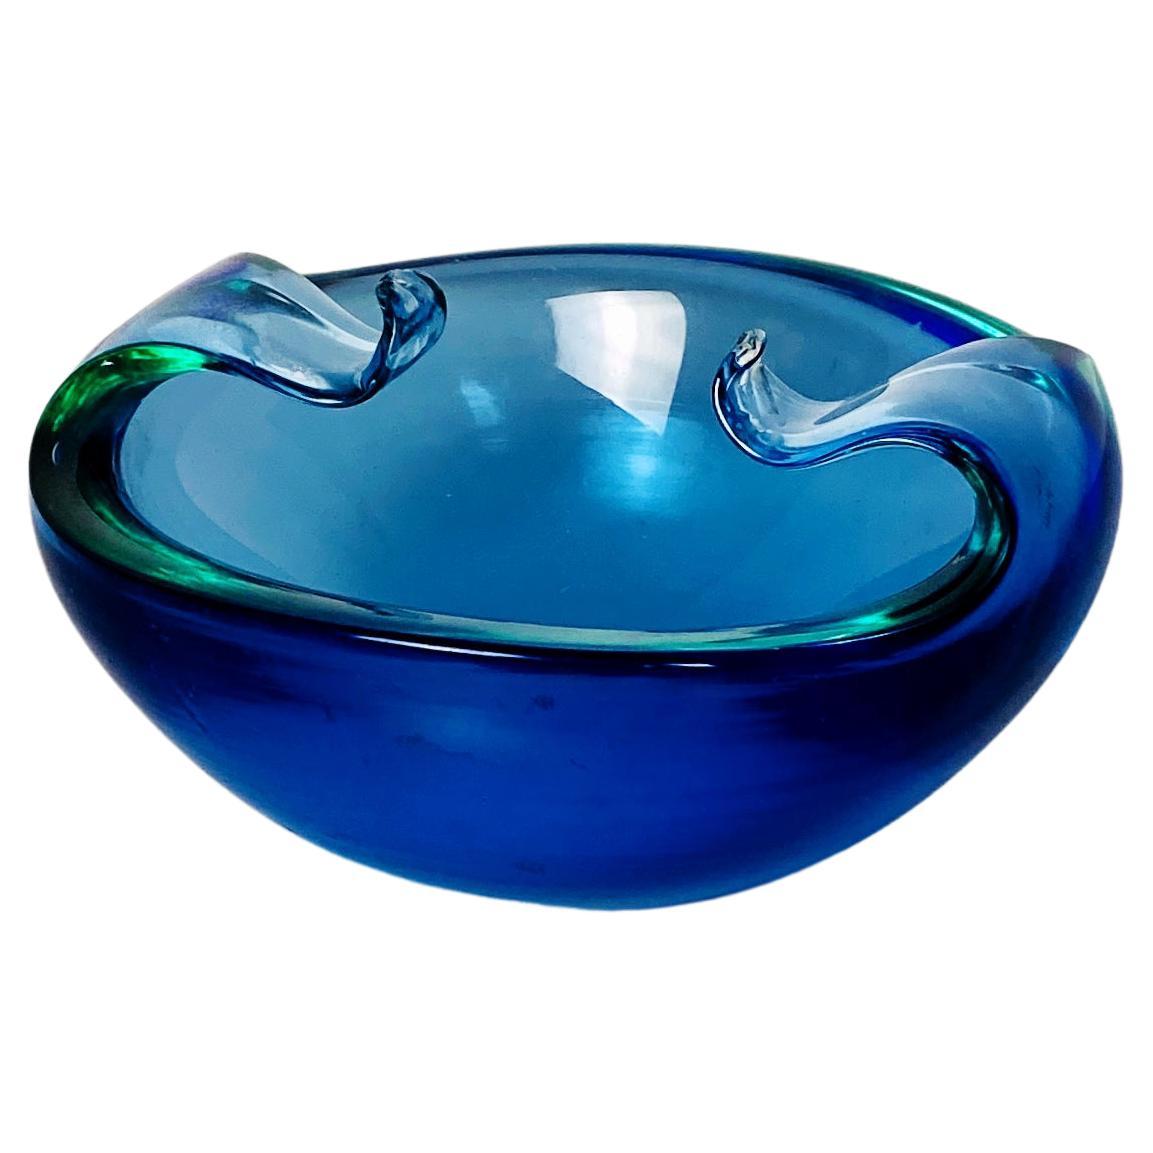 Italian Mid-Century Modern Murano Glass Object Holder with Curled Arms, 1970s For Sale